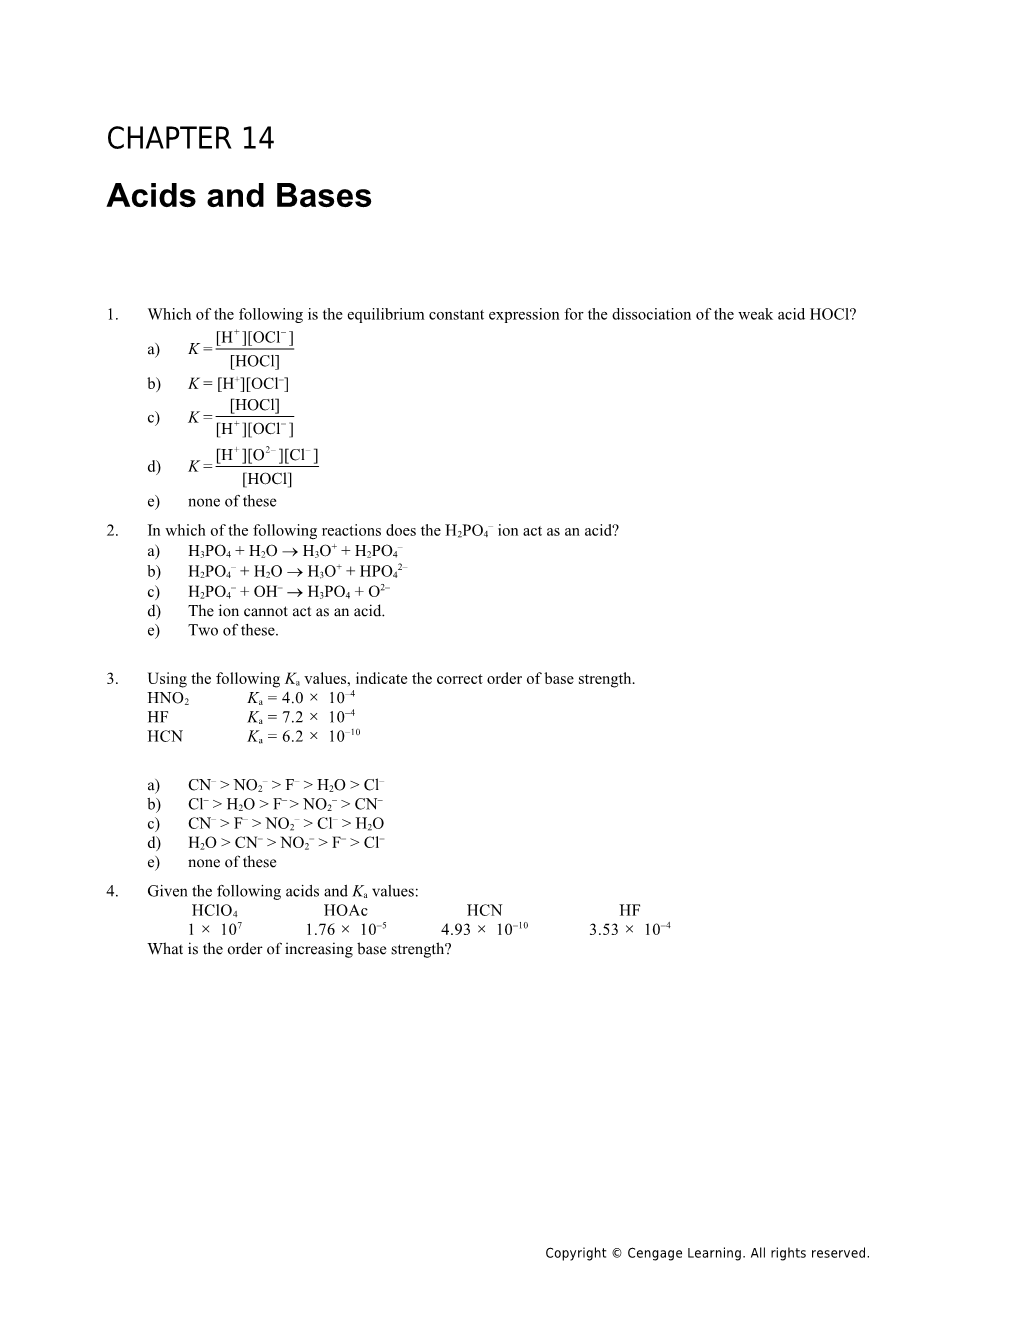 Chapter 14: Acids and Bases 1